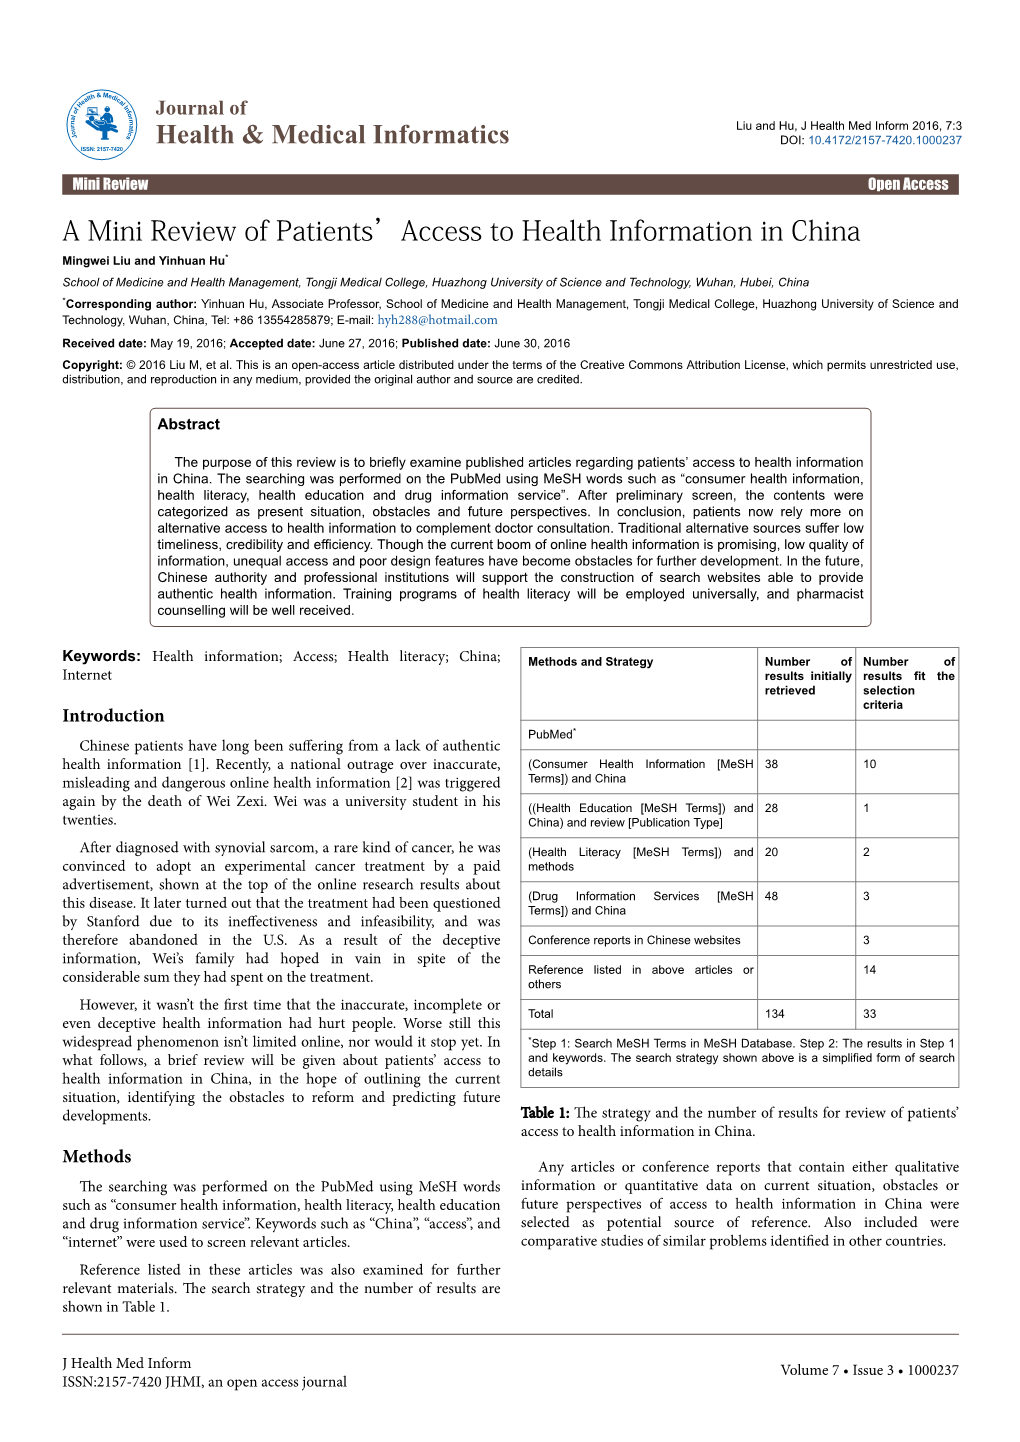 A Mini Review of Patients'access to Health Information in China